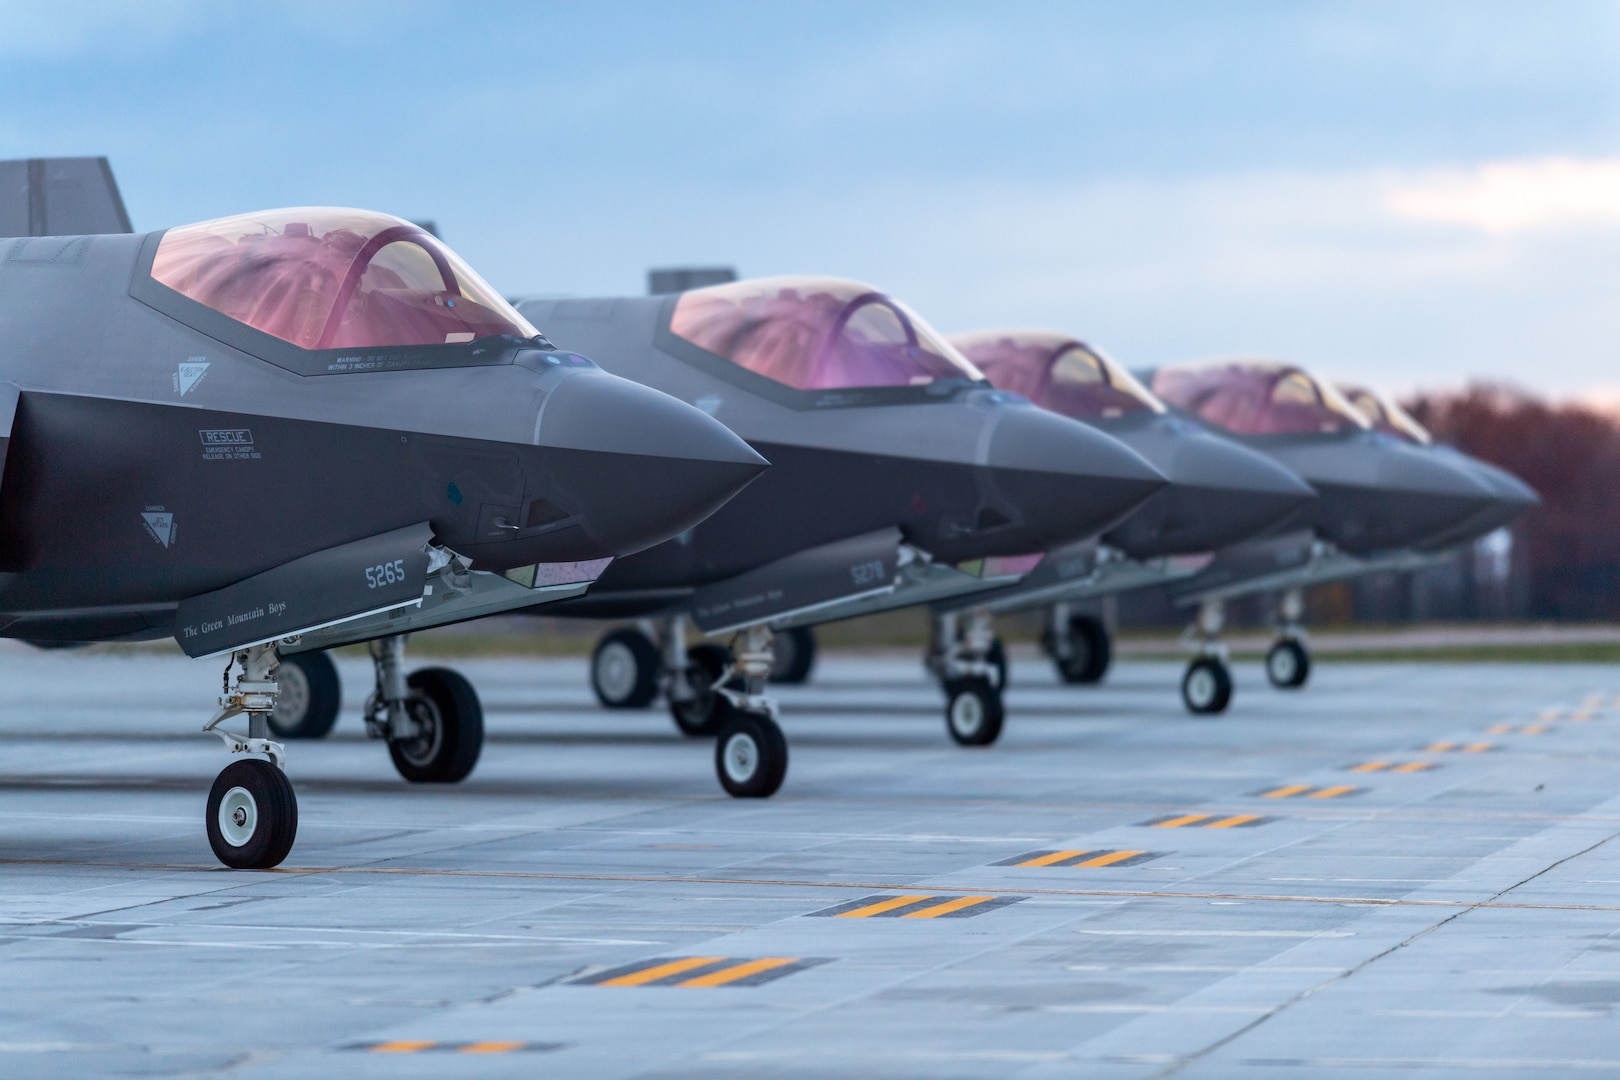 F-35A Lightning II pilots assigned to the 134th Fighter Squadron, Vermont Air National Guard, prepare to depart during a routine night training mission, Vermont Air National Guard Base, South Burlington, Vermont, Nov. 16, 2021. The 158th FW is the first Air National Guard wing to earn full combat-ready status on the F-35. (U.S. Air National Guard photo by Julie M. Paroline)